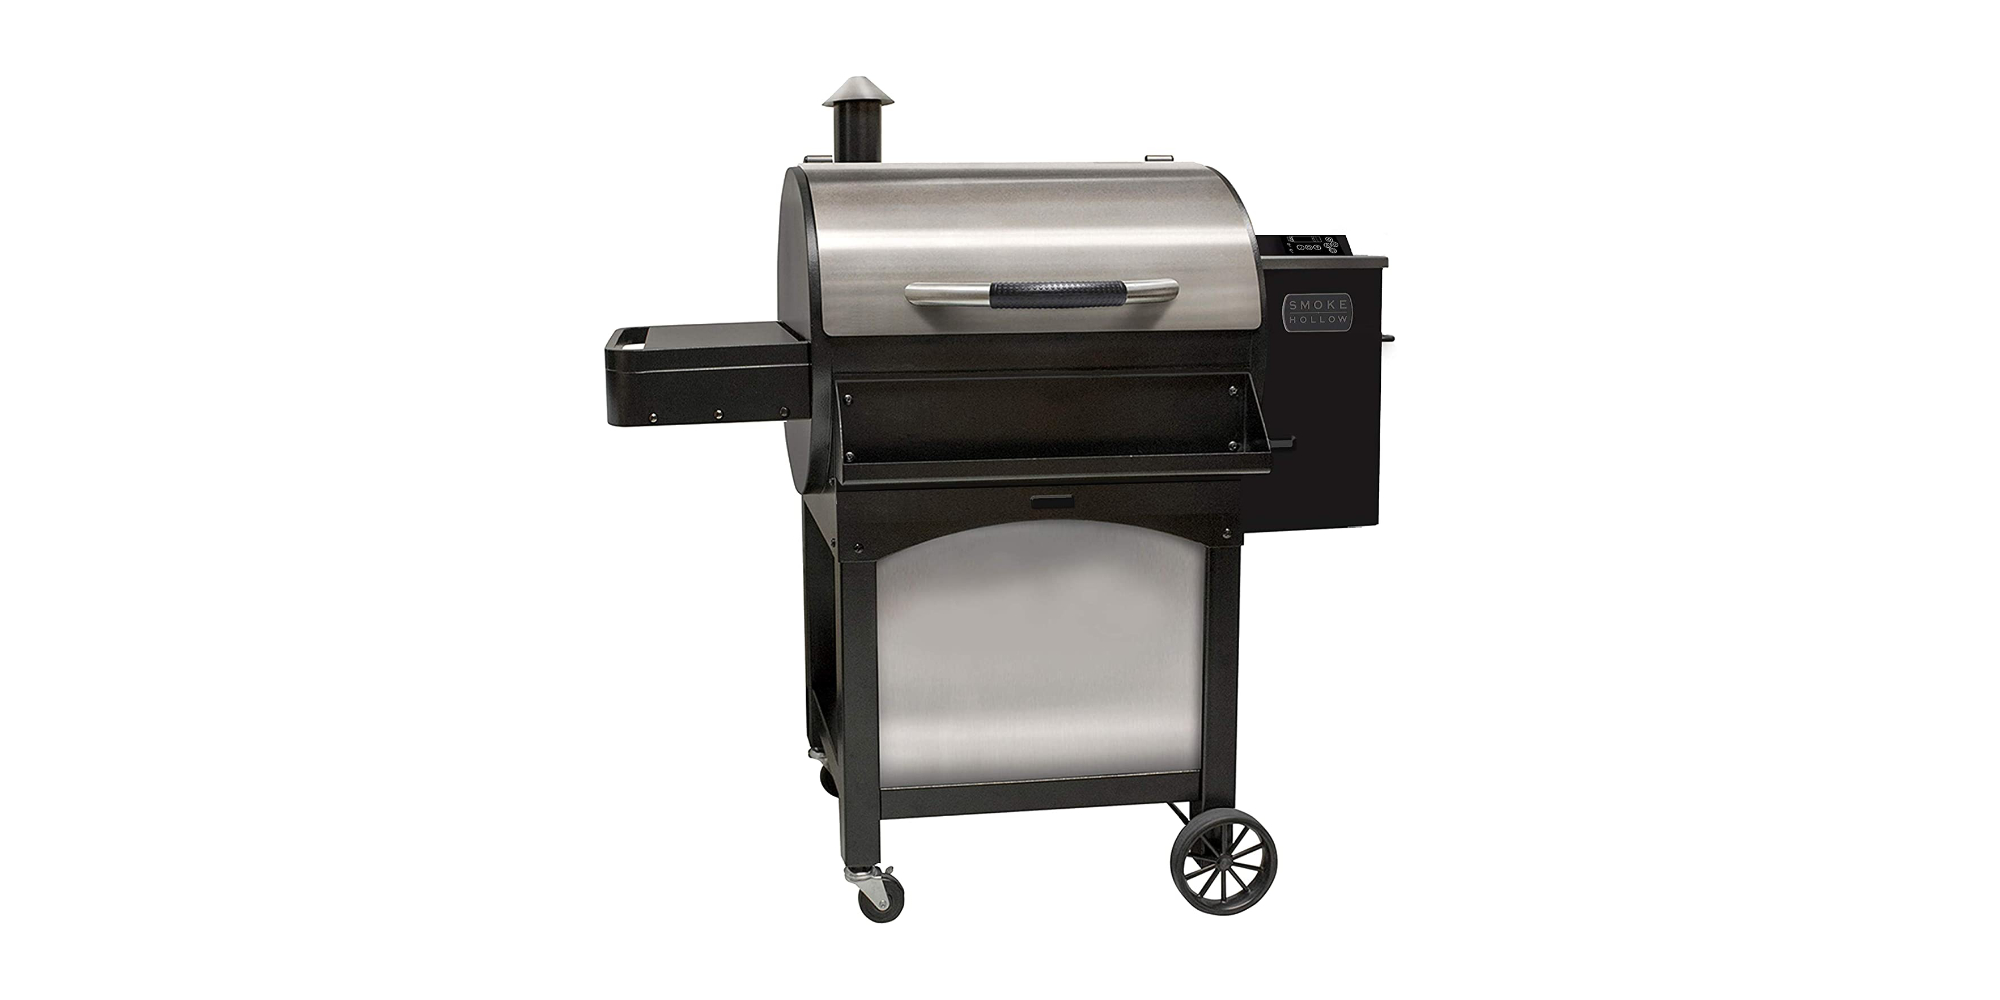 Masterbuilt S Smoke Hollow 24 Inch Pellet Grill Plunges To Low Of 185 50 Reg 300 9to5toys